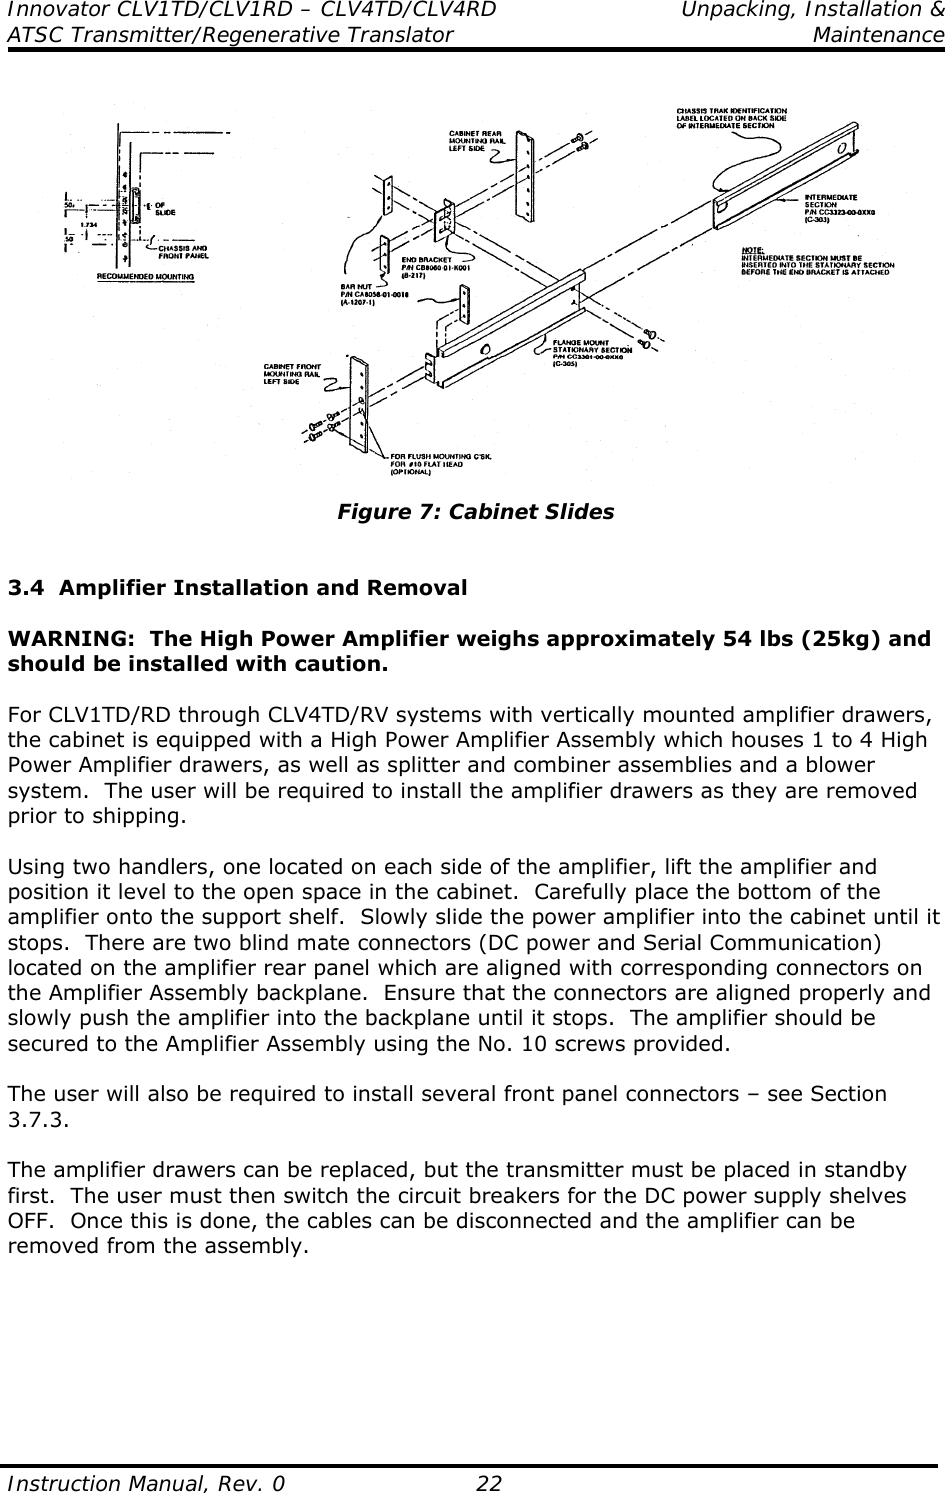 Innovator CLV1TD/CLV1RD – CLV4TD/CLV4RD  Unpacking, Installation &amp; ATSC Transmitter/Regenerative Translator  Maintenance  Instruction Manual, Rev. 0    22   Figure 7: Cabinet Slides   3.4  Amplifier Installation and Removal  WARNING:  The High Power Amplifier weighs approximately 54 lbs (25kg) and should be installed with caution.  For CLV1TD/RD through CLV4TD/RV systems with vertically mounted amplifier drawers, the cabinet is equipped with a High Power Amplifier Assembly which houses 1 to 4 High Power Amplifier drawers, as well as splitter and combiner assemblies and a blower system.  The user will be required to install the amplifier drawers as they are removed prior to shipping.  Using two handlers, one located on each side of the amplifier, lift the amplifier and position it level to the open space in the cabinet.  Carefully place the bottom of the amplifier onto the support shelf.  Slowly slide the power amplifier into the cabinet until it stops.  There are two blind mate connectors (DC power and Serial Communication) located on the amplifier rear panel which are aligned with corresponding connectors on the Amplifier Assembly backplane.  Ensure that the connectors are aligned properly and slowly push the amplifier into the backplane until it stops.  The amplifier should be secured to the Amplifier Assembly using the No. 10 screws provided.  The user will also be required to install several front panel connectors – see Section 3.7.3.  The amplifier drawers can be replaced, but the transmitter must be placed in standby first.  The user must then switch the circuit breakers for the DC power supply shelves OFF.  Once this is done, the cables can be disconnected and the amplifier can be removed from the assembly.        